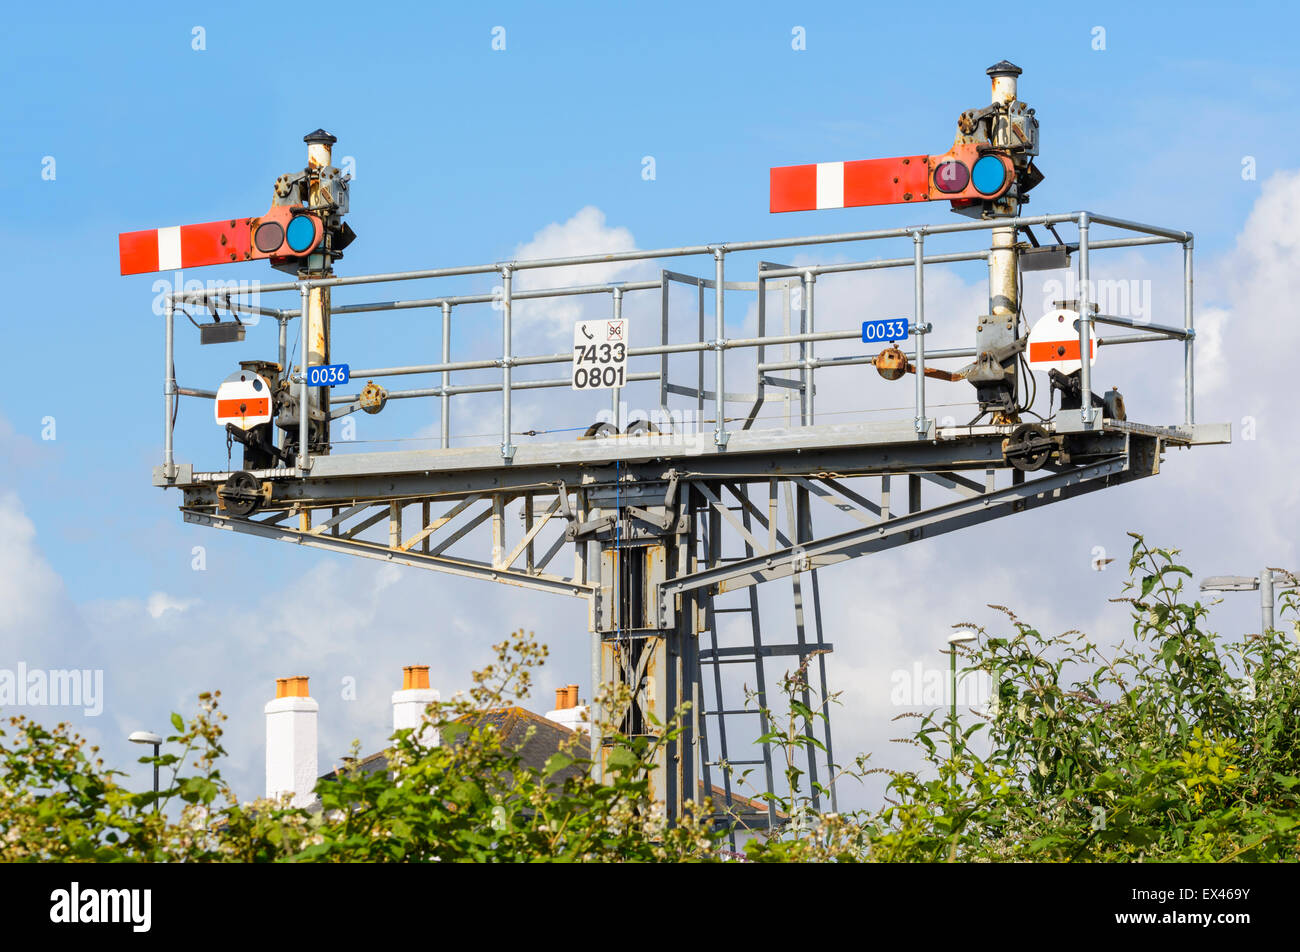 Semaphore stop signals on a signal gantry on a British railway, both in the stop position, in Southern England, UK. Stock Photo